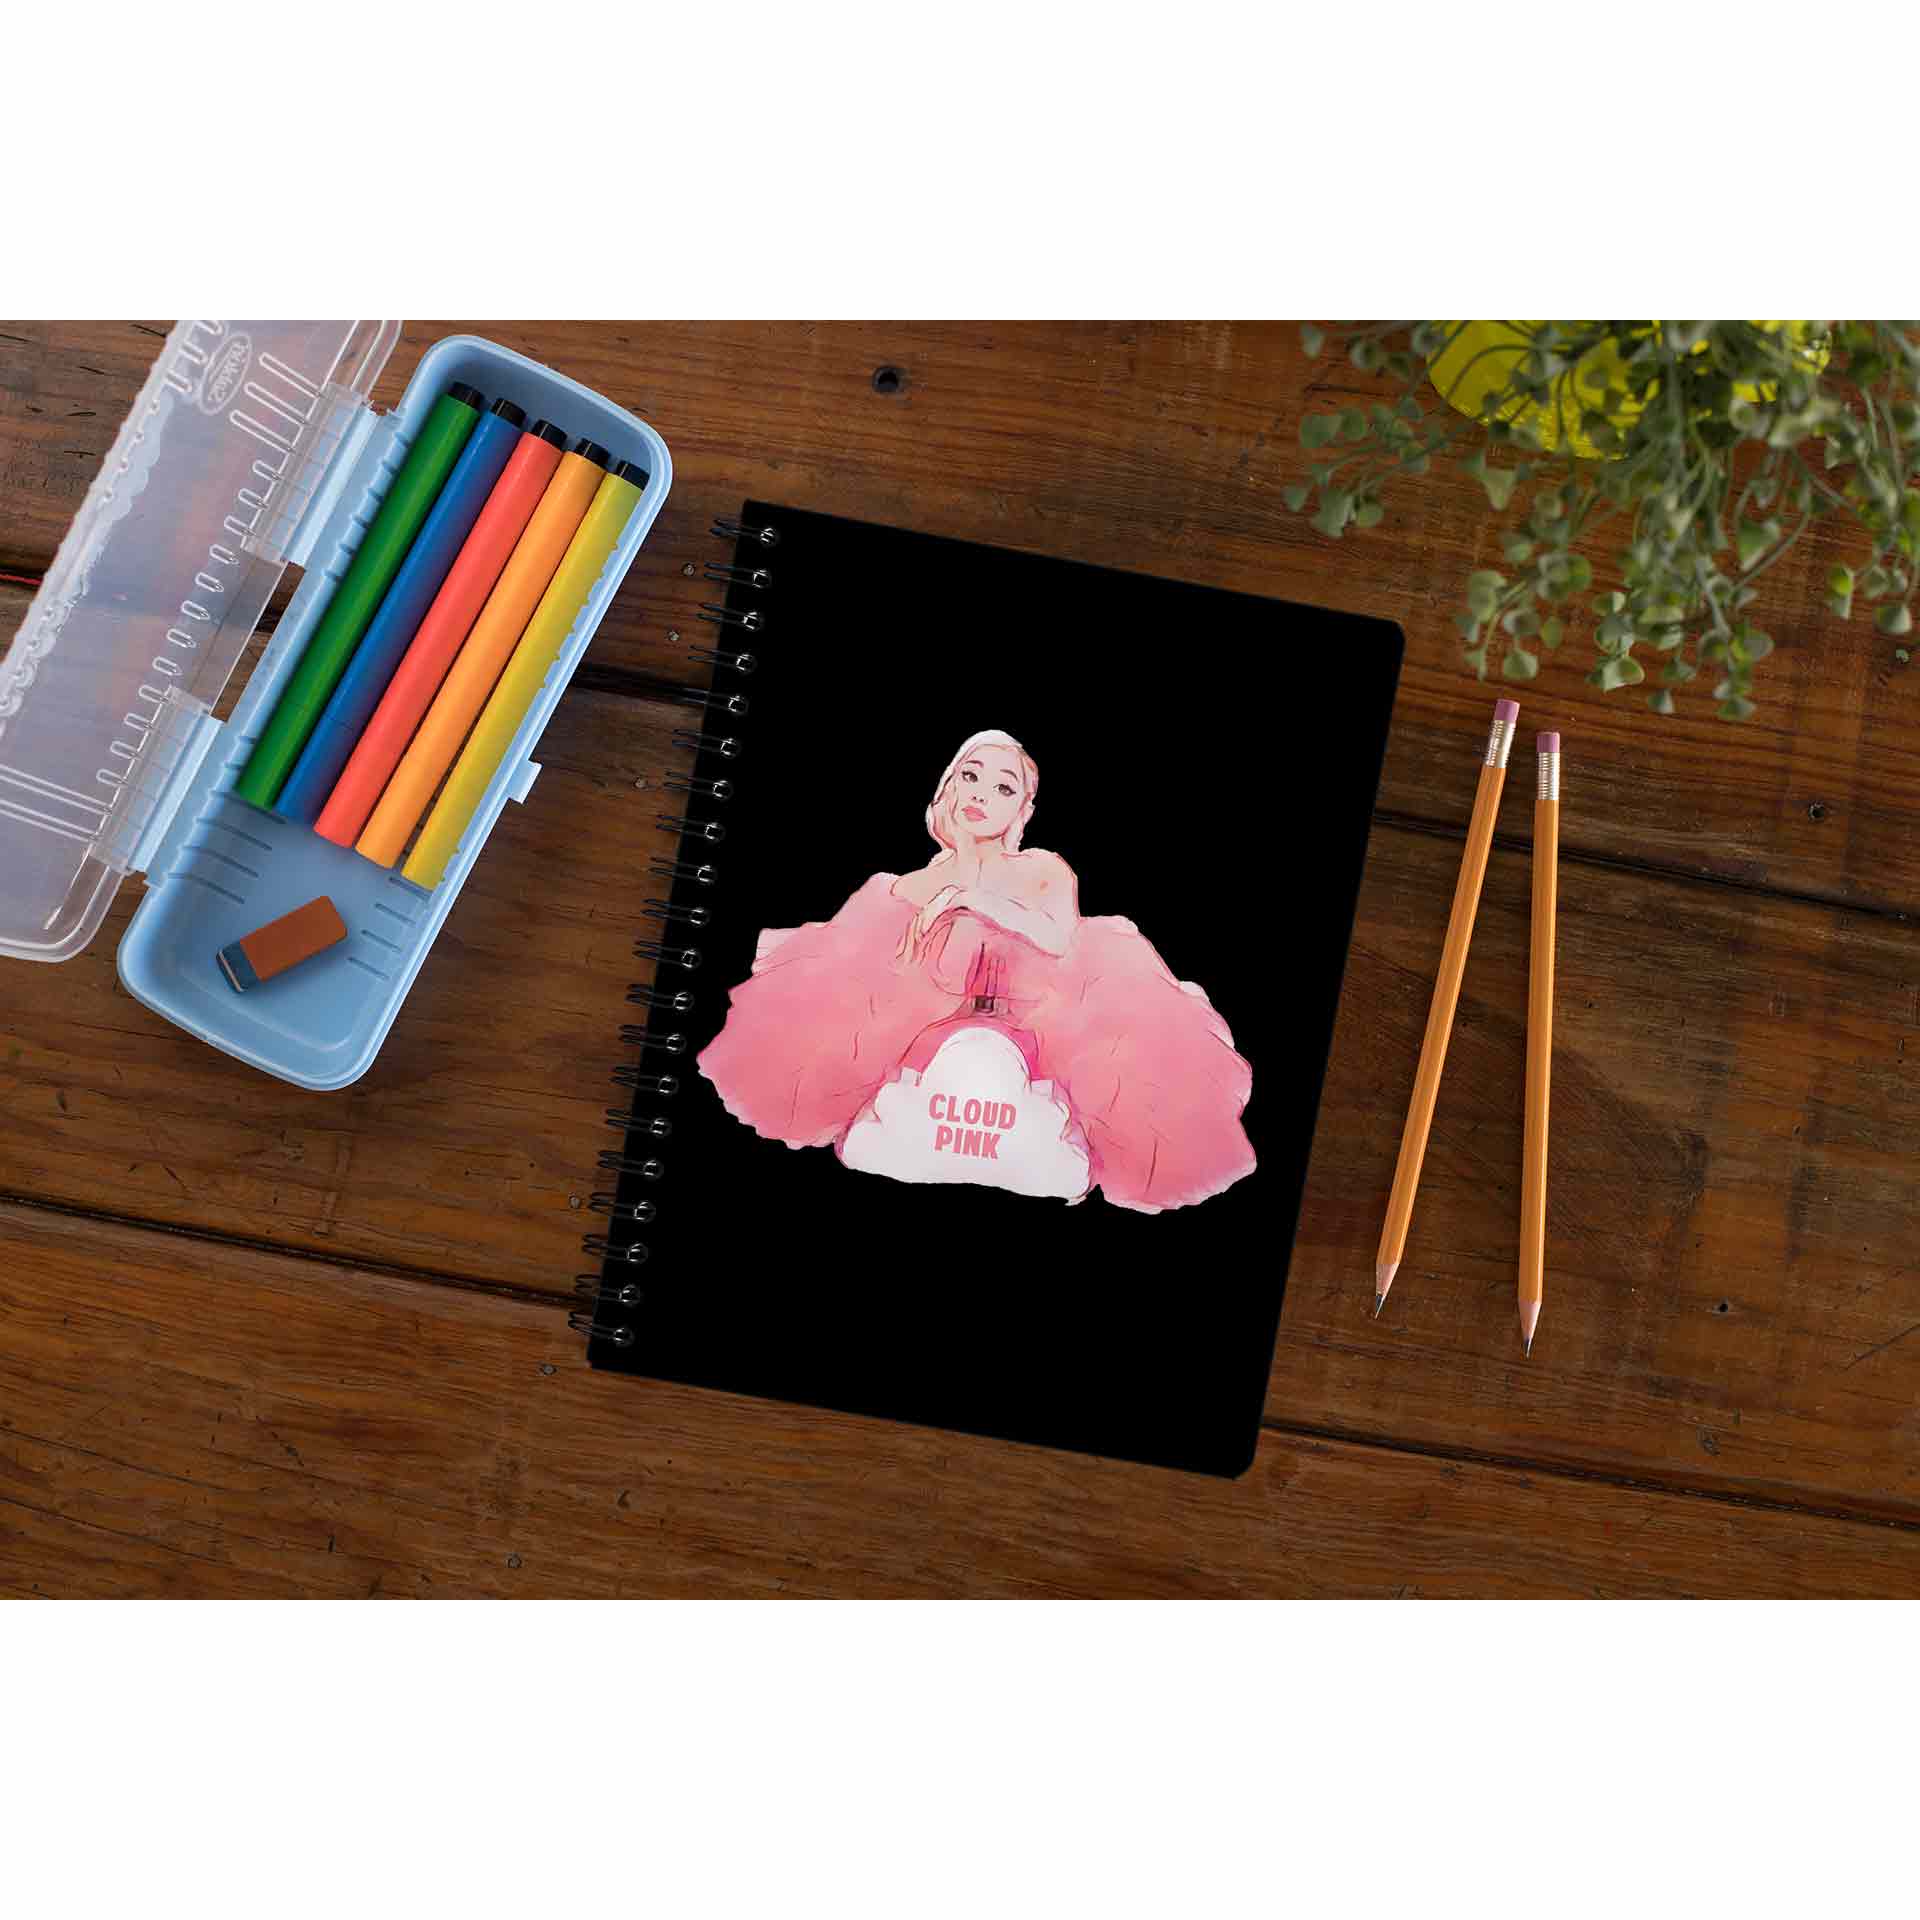 ariana grande cloud pink notebook notepad diary buy online india the banyan tee tbt unruled 